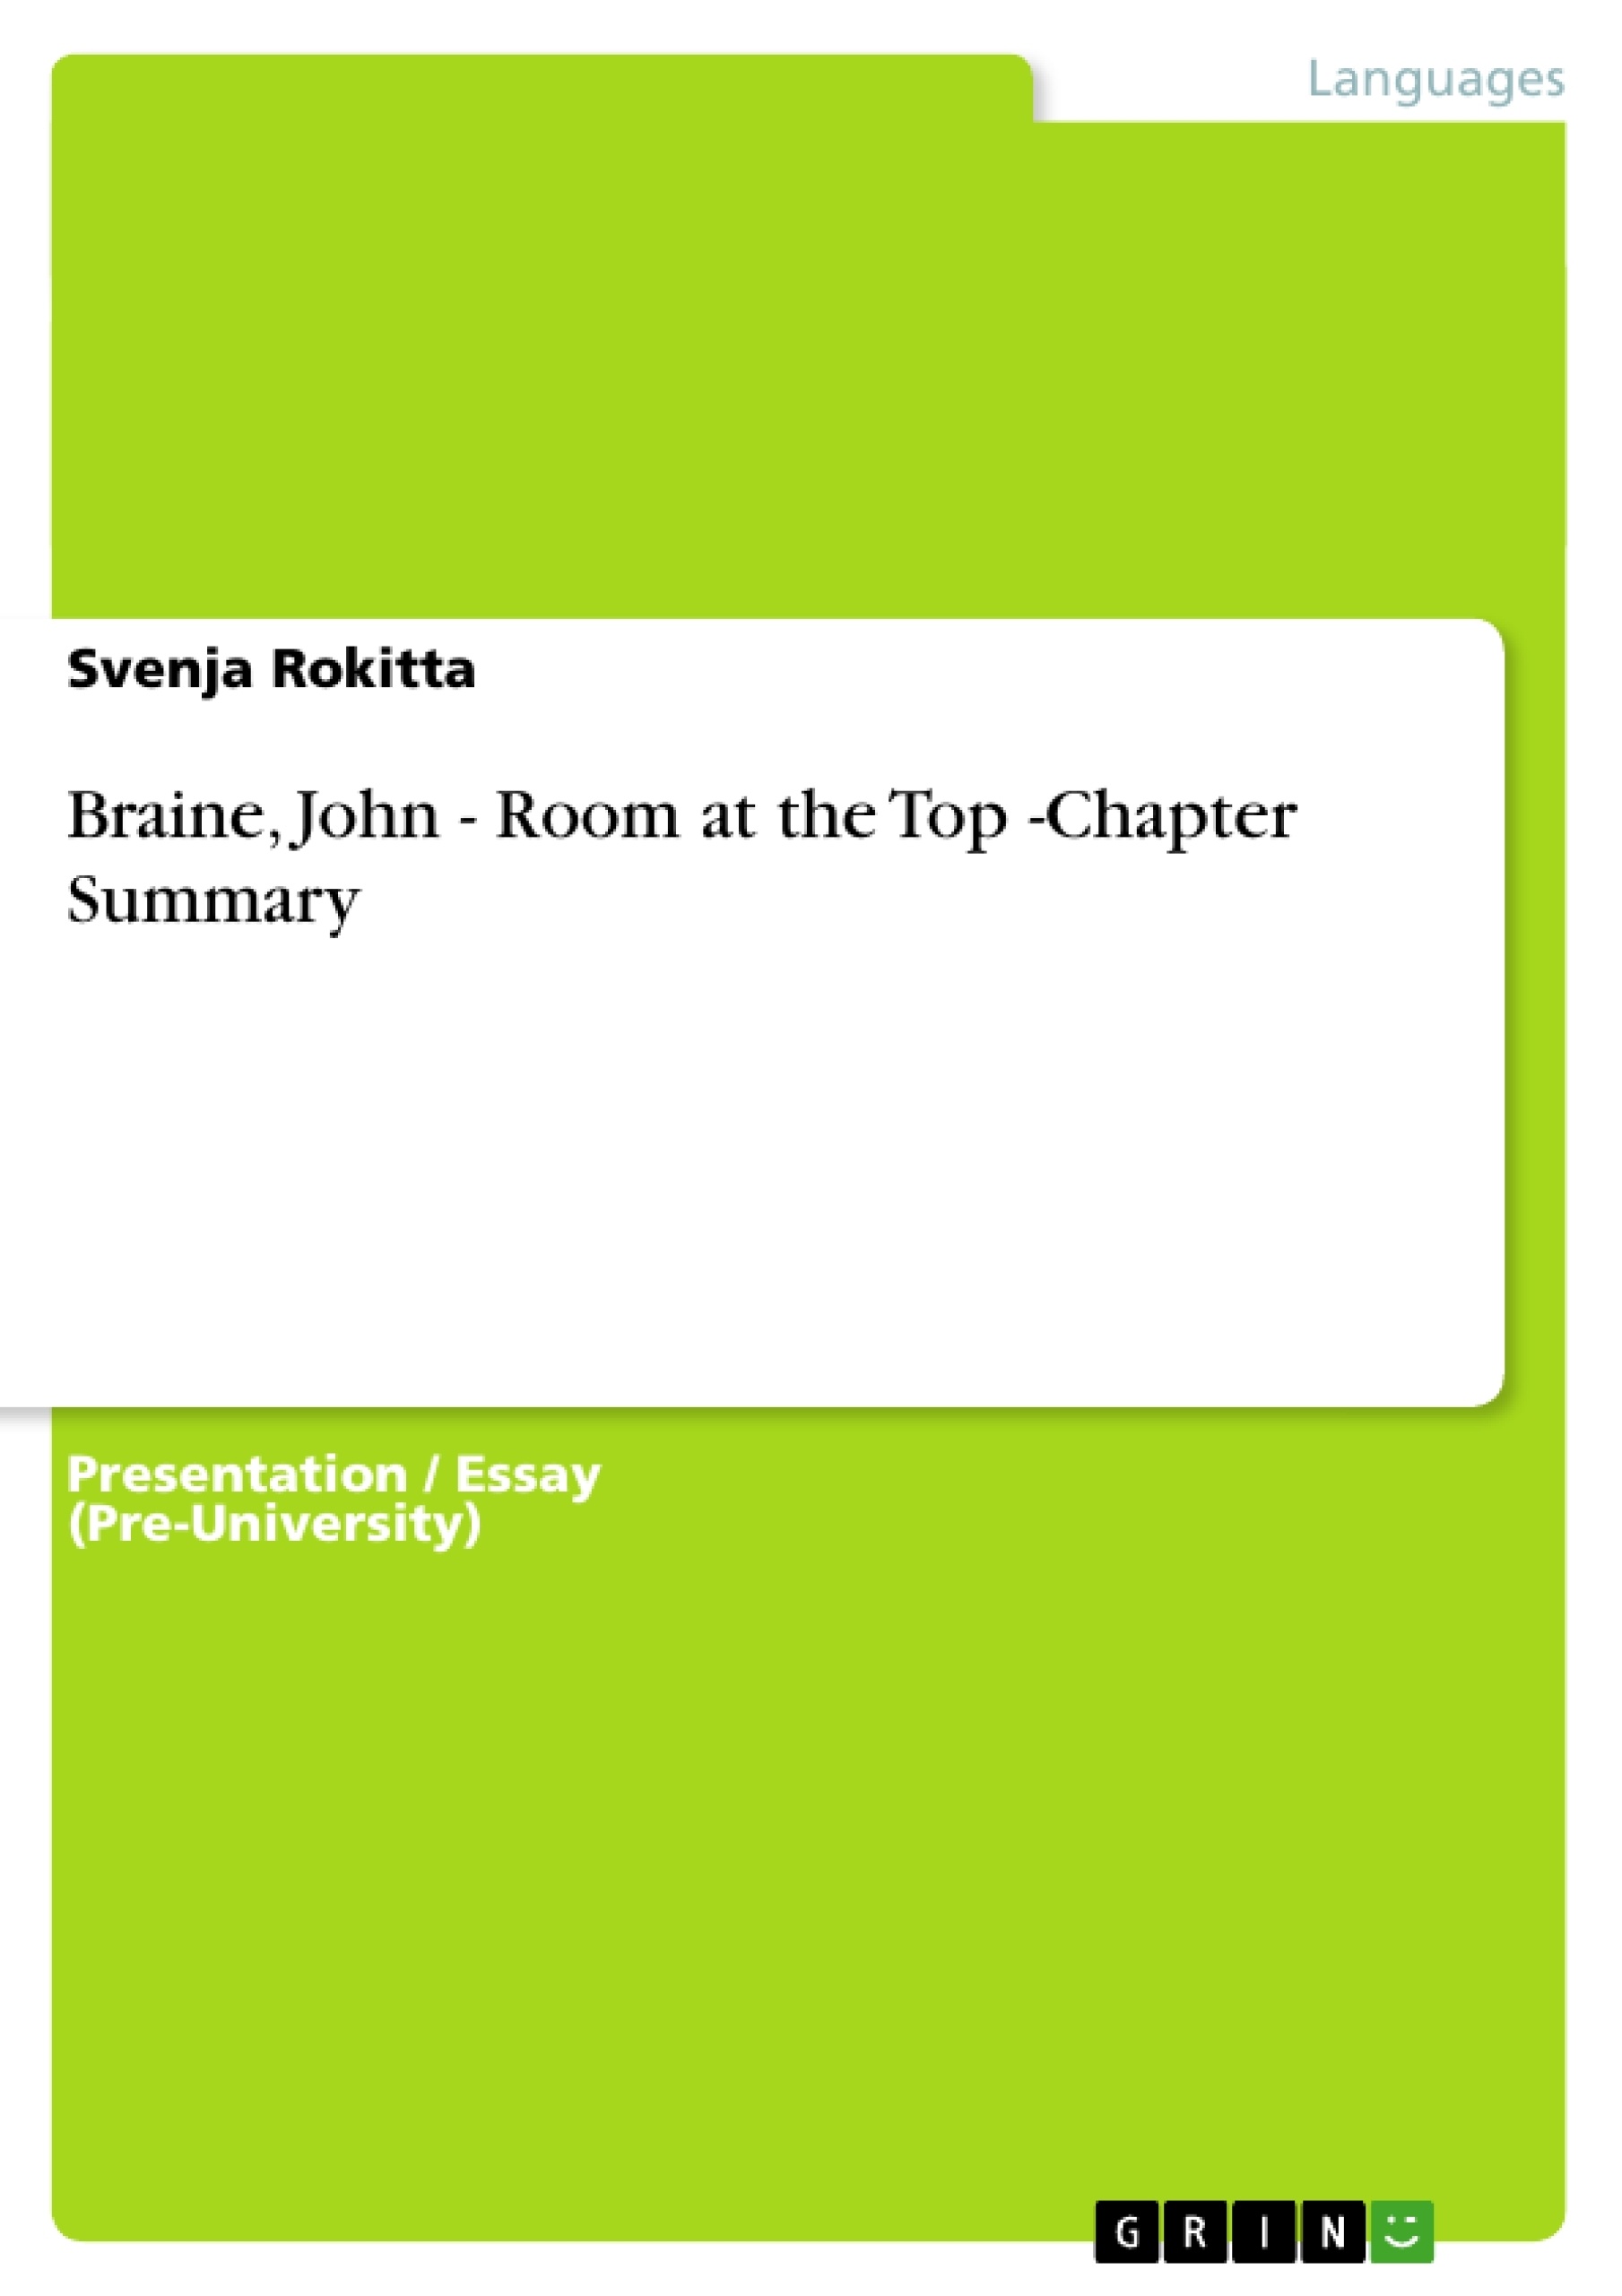 Title: Braine, John - Room at the Top -Chapter Summary